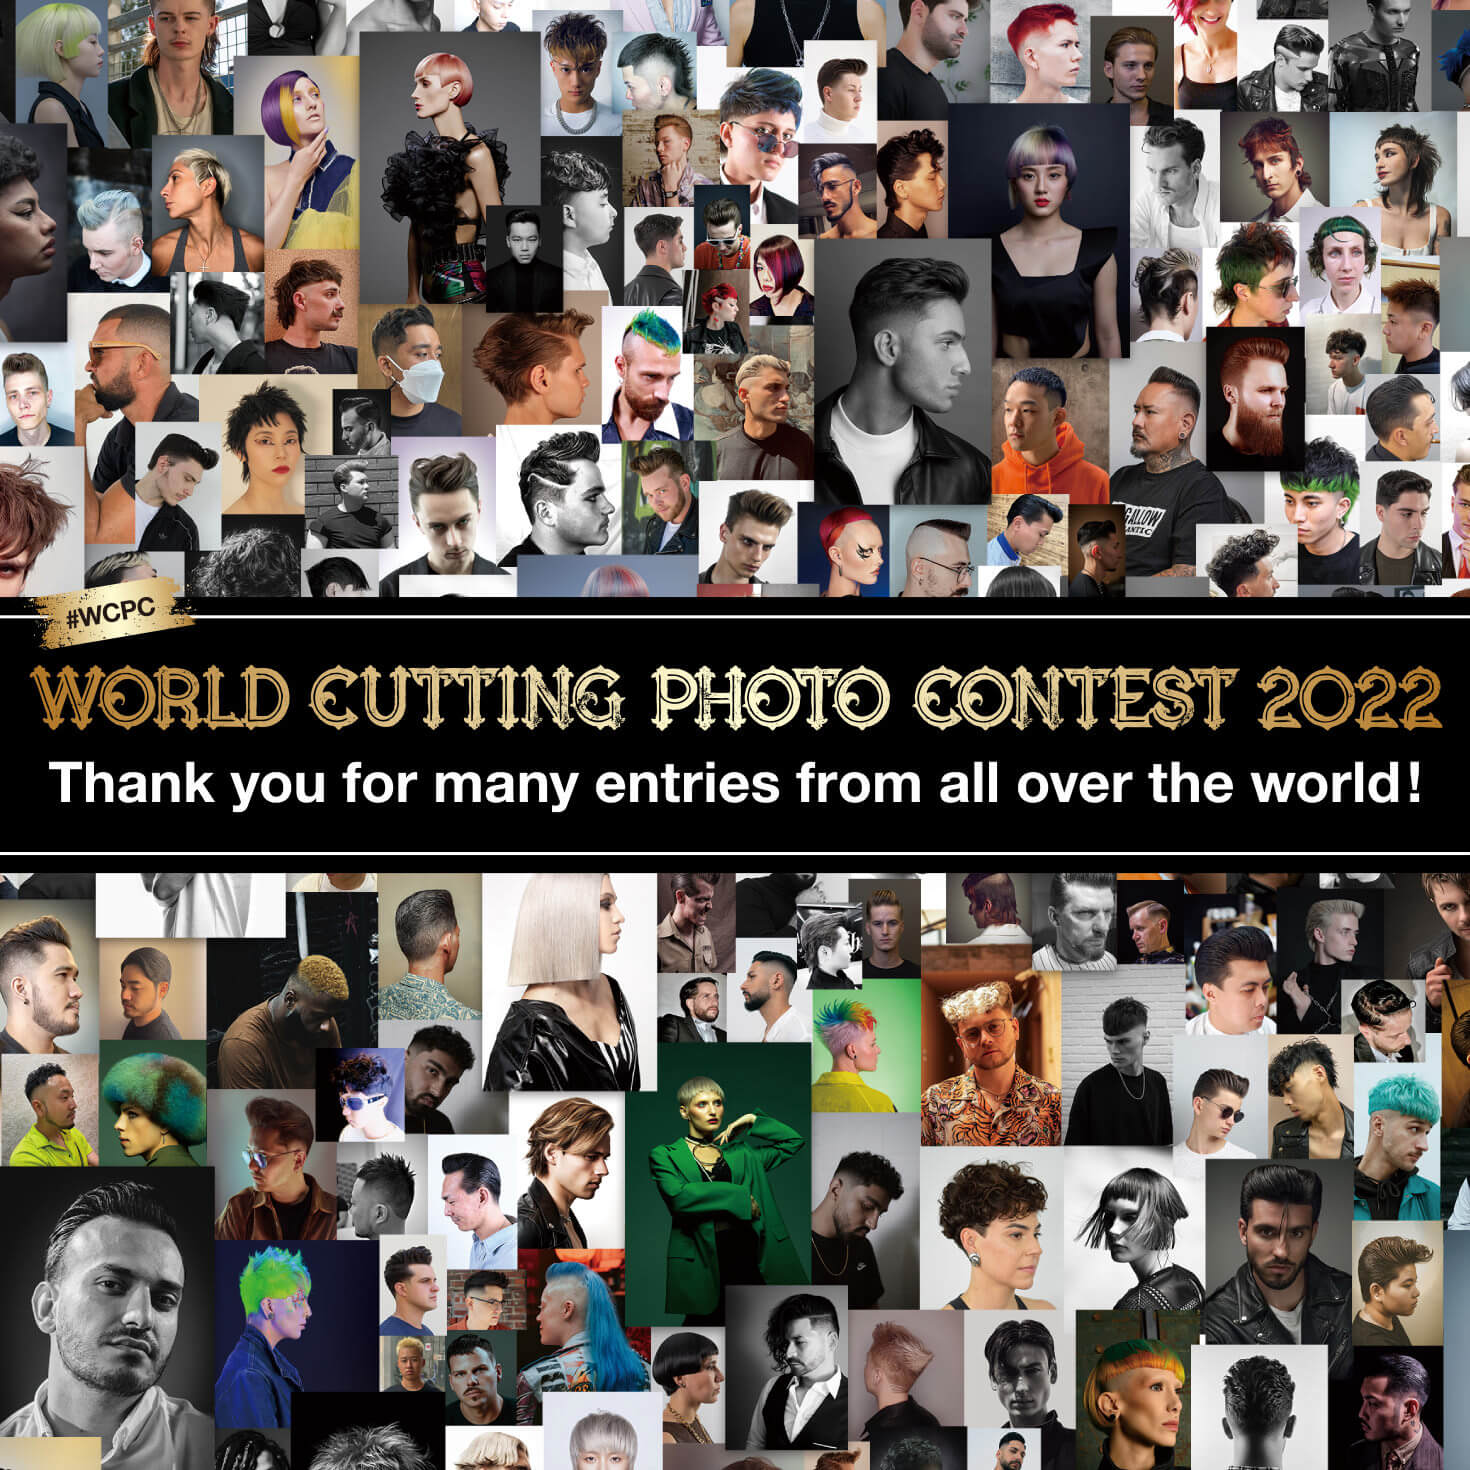 WORLD CUTTING PHOTO CONTEST Thank you for many entries from all over the world!